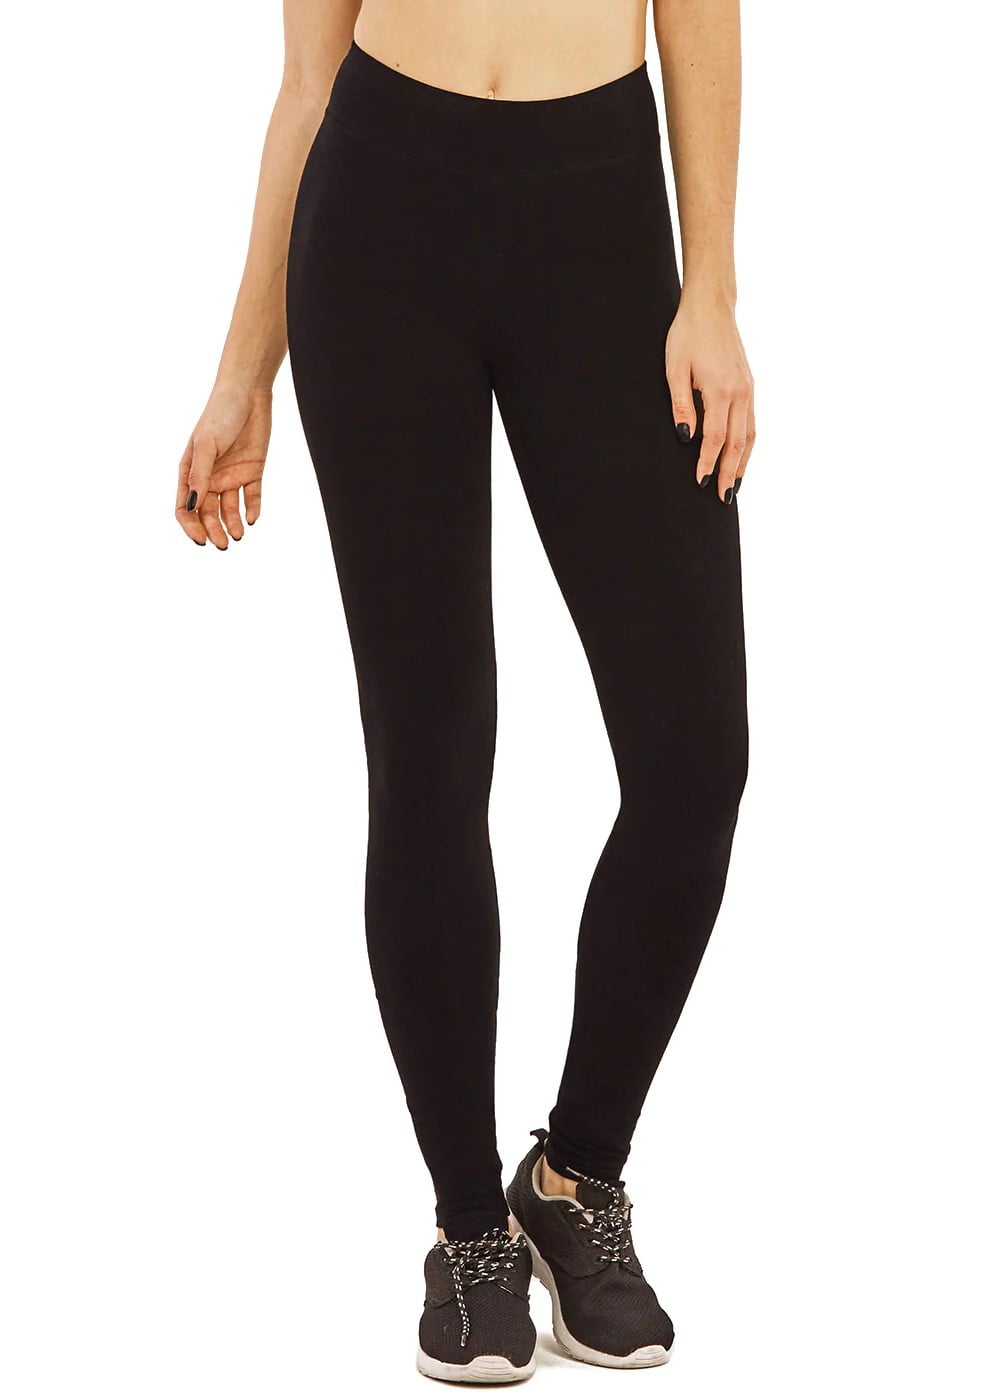 Buy Jockey AA01 Leggings With Concealed Side Pocket And Drawstring Closure  J Teal Marl XL Online at Low Prices in India at Bigdeals24x7.com